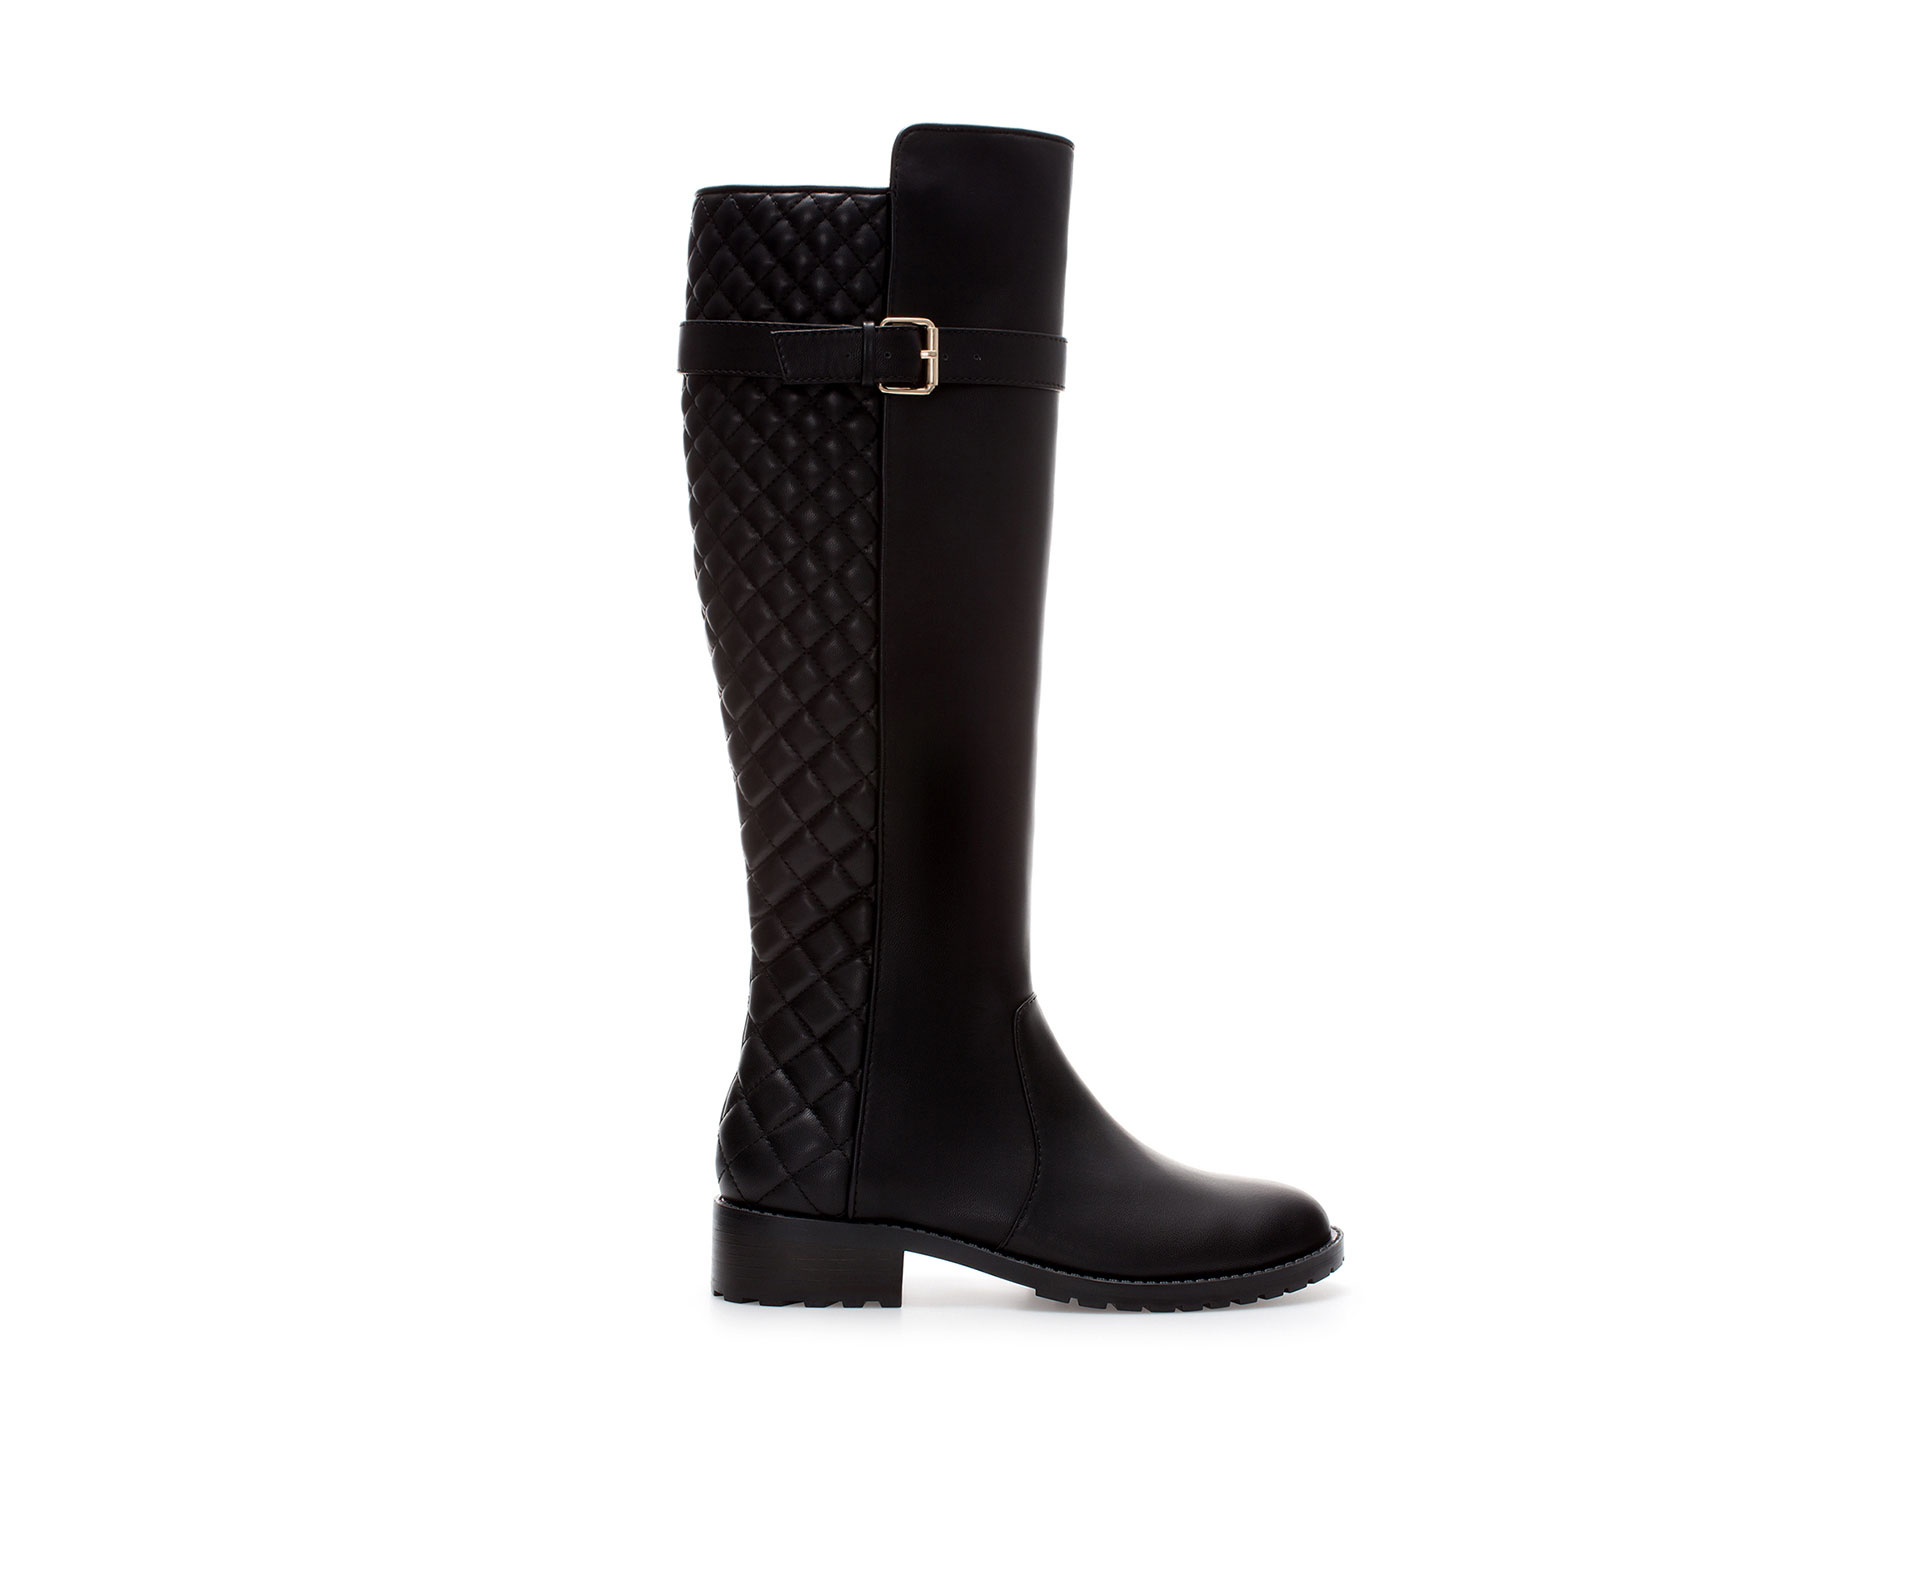 Zara Quilted Boot in Black